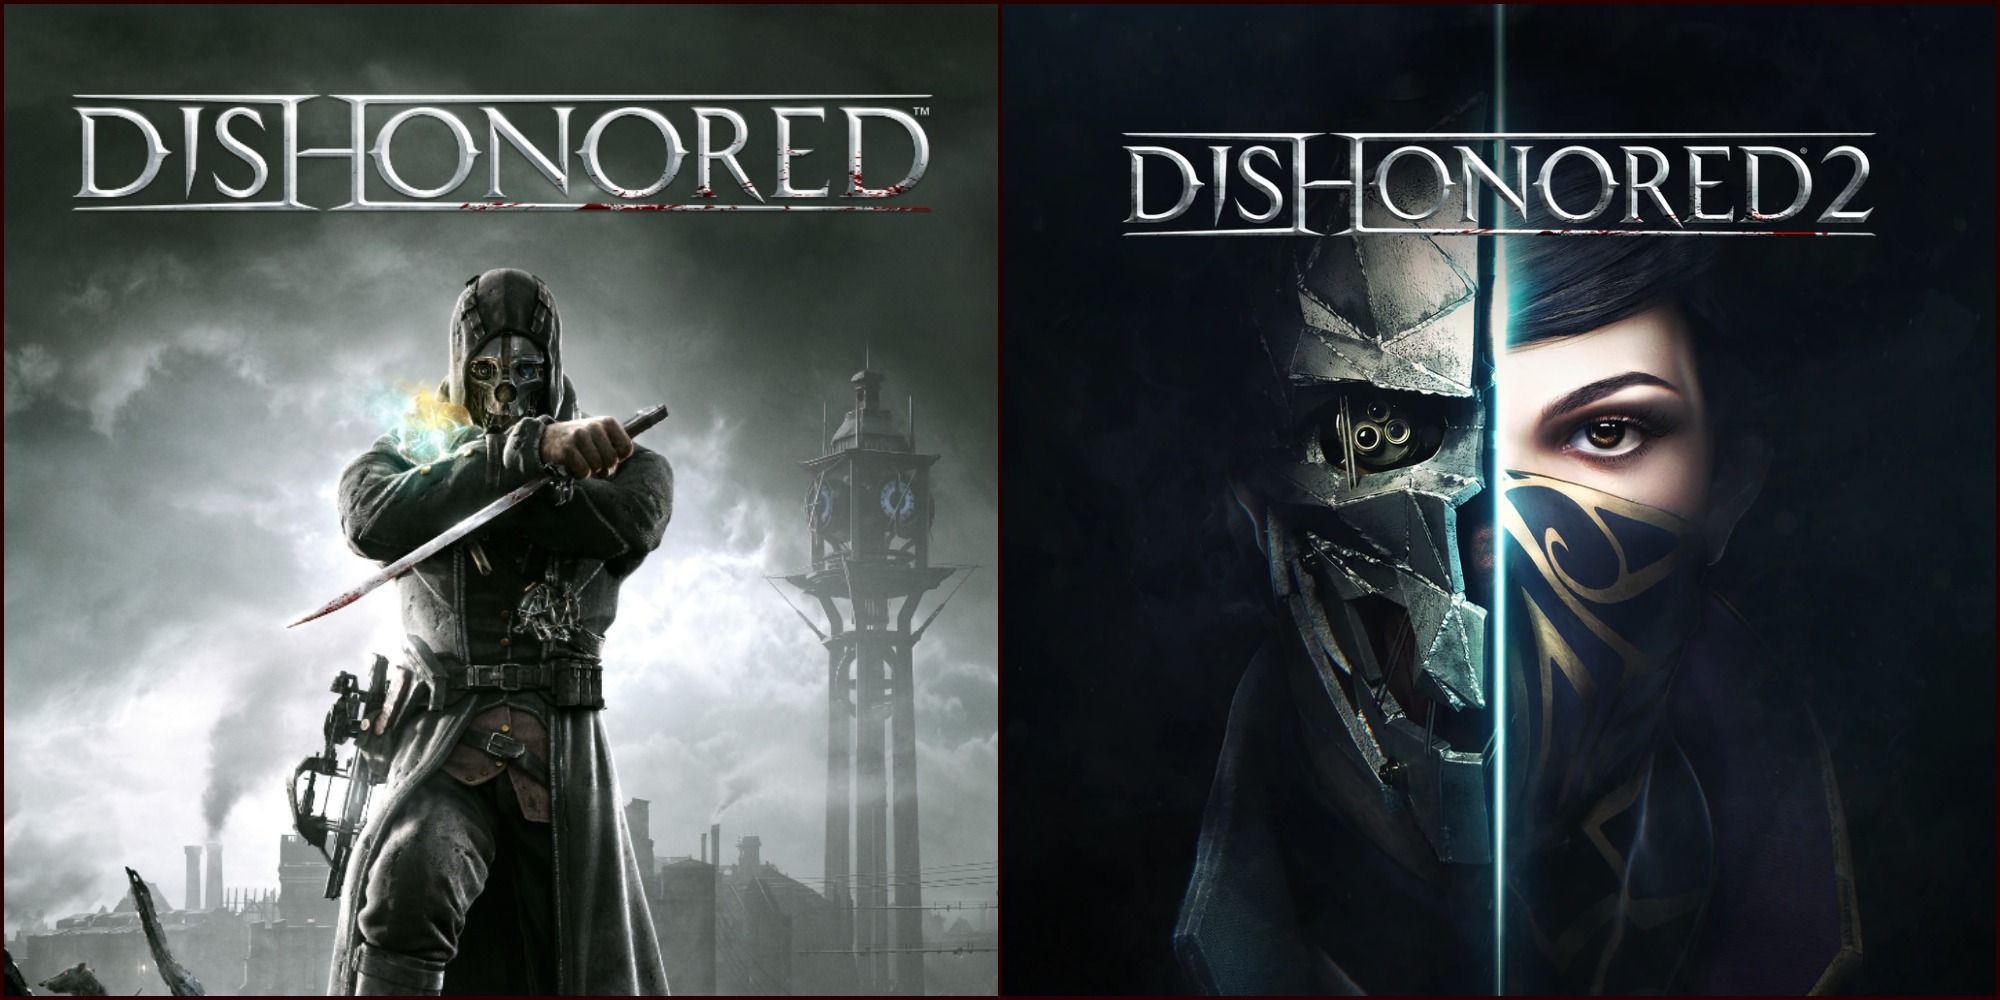 Dishonored cover with Corvo standing with his hand and sword raised, and Dishonored 2 cover with a face split down of middle blending Corvo and Emily's faces